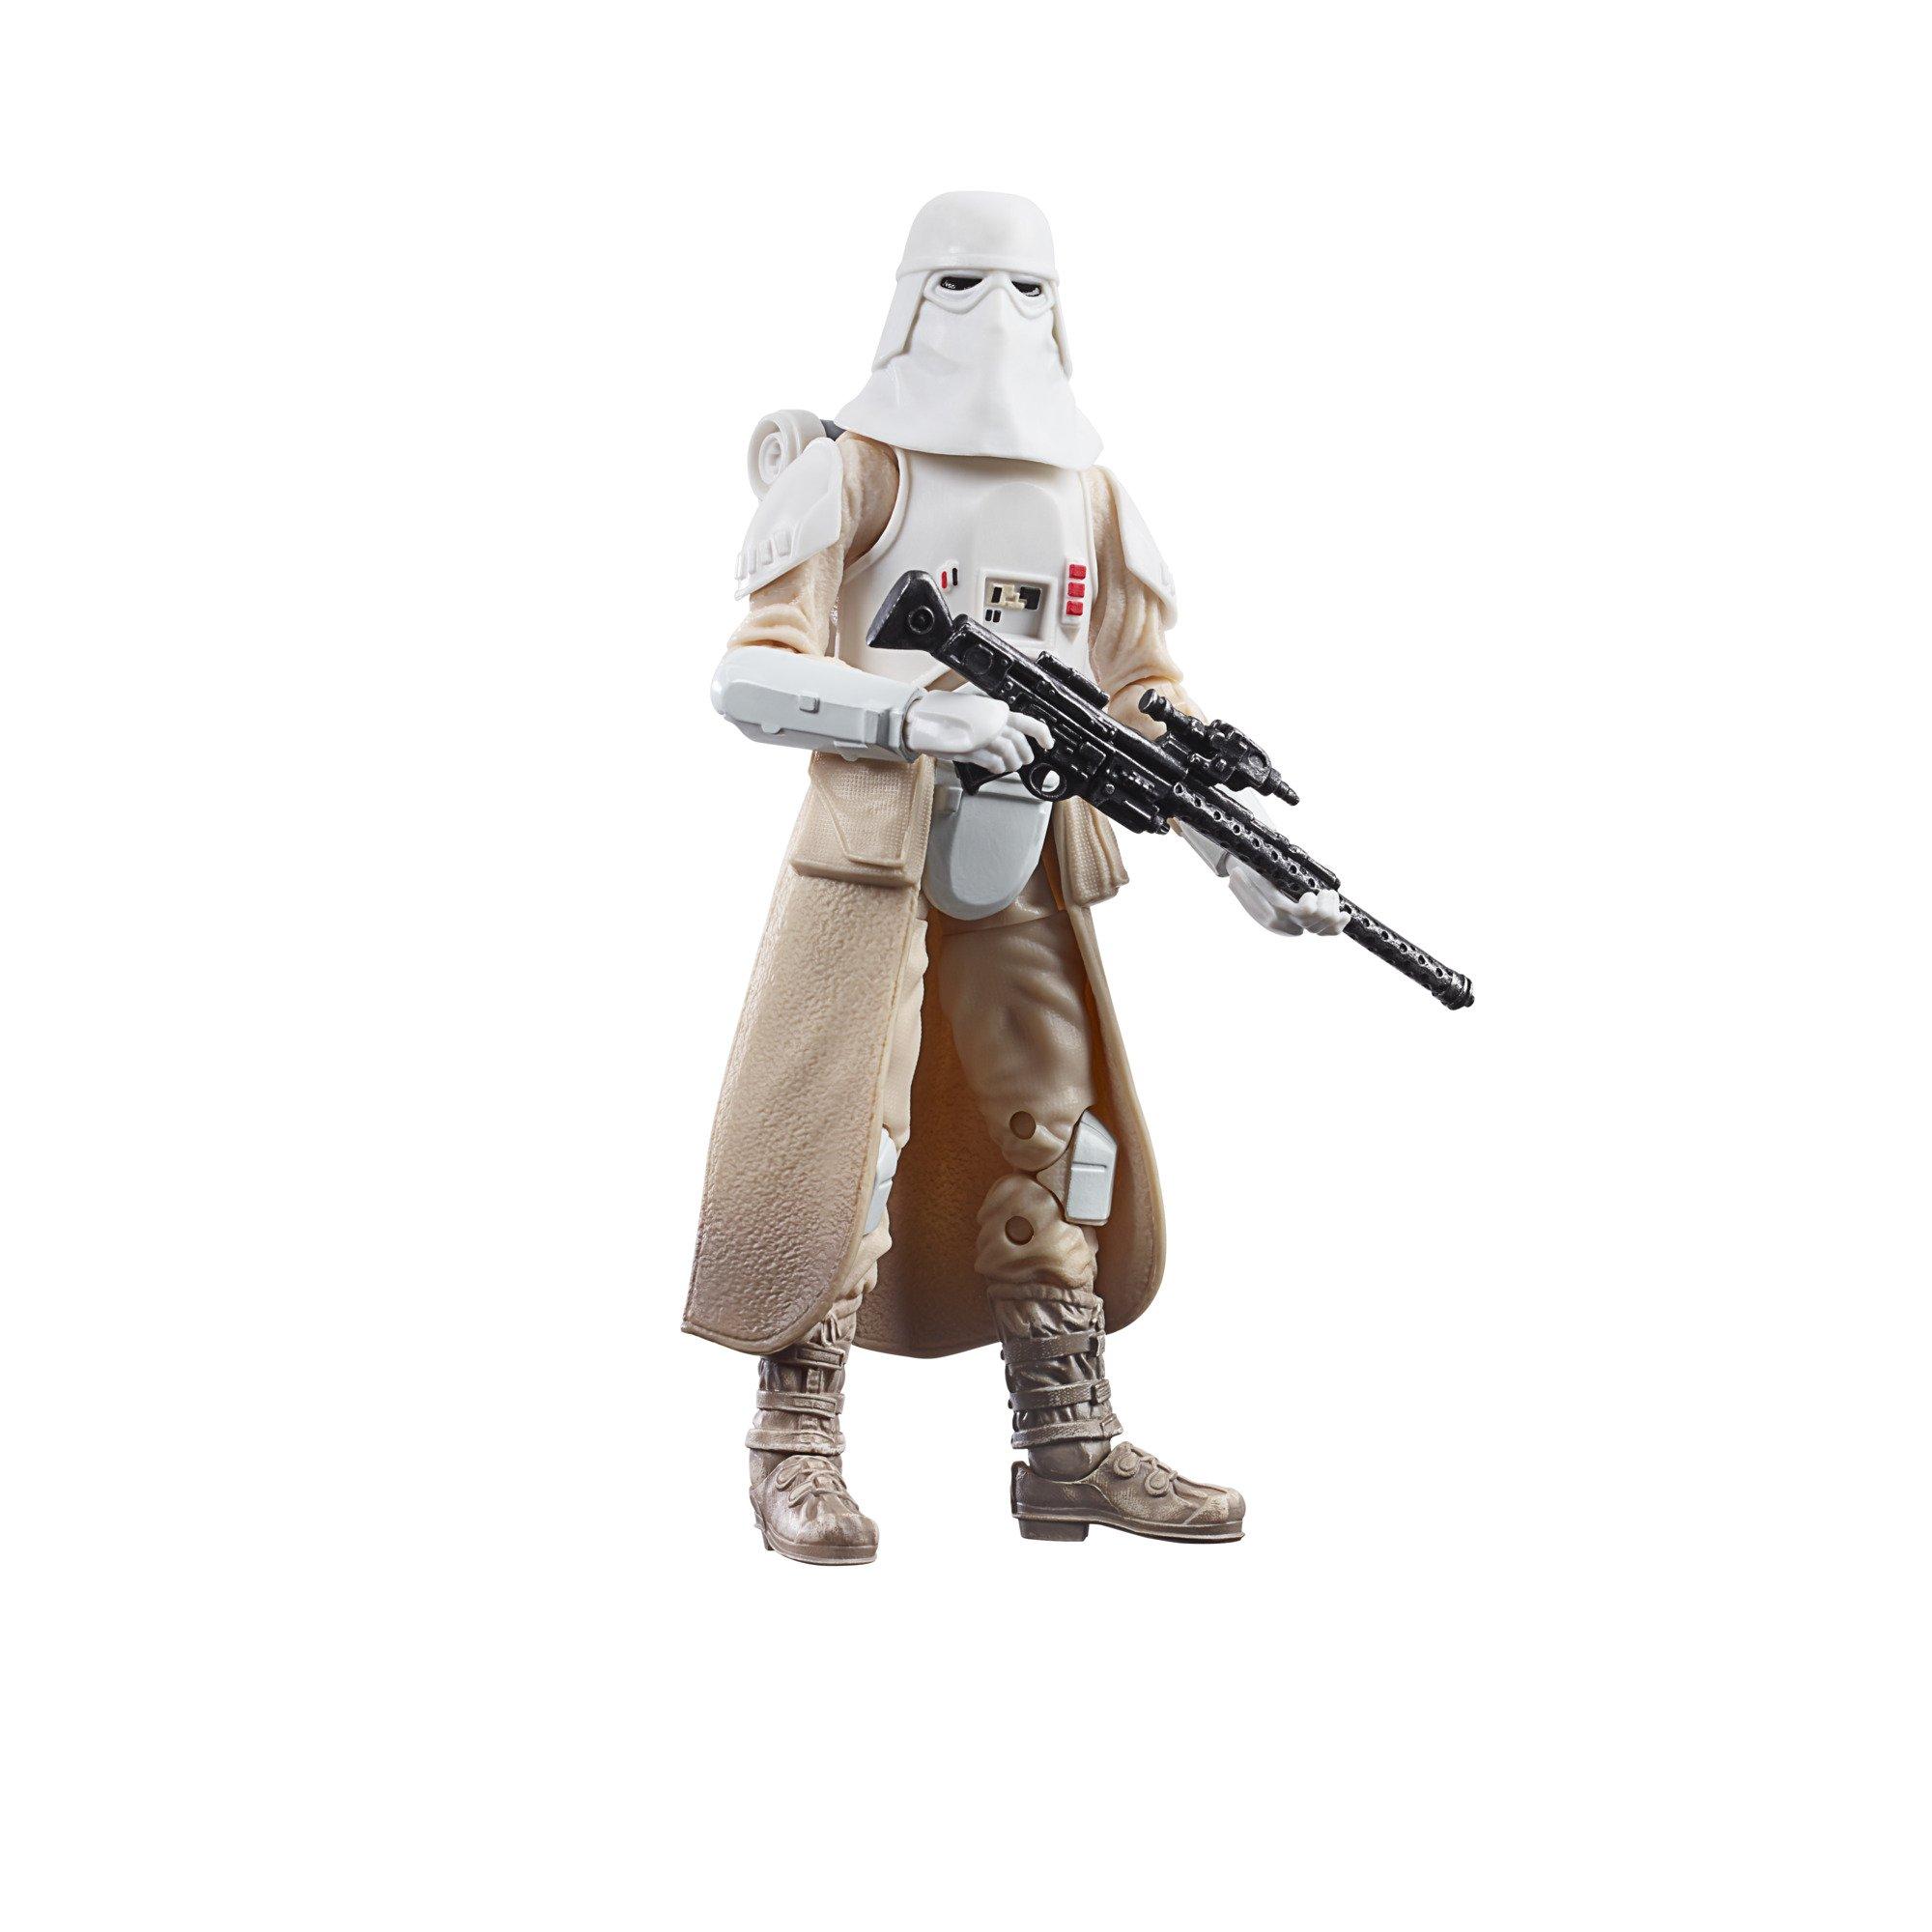 list item 1 of 7 Hasbro Star Wars: The Black Series Episode V 40th Anniversary Imperial Snowtrooper (Hoth) 6-in Action Figure